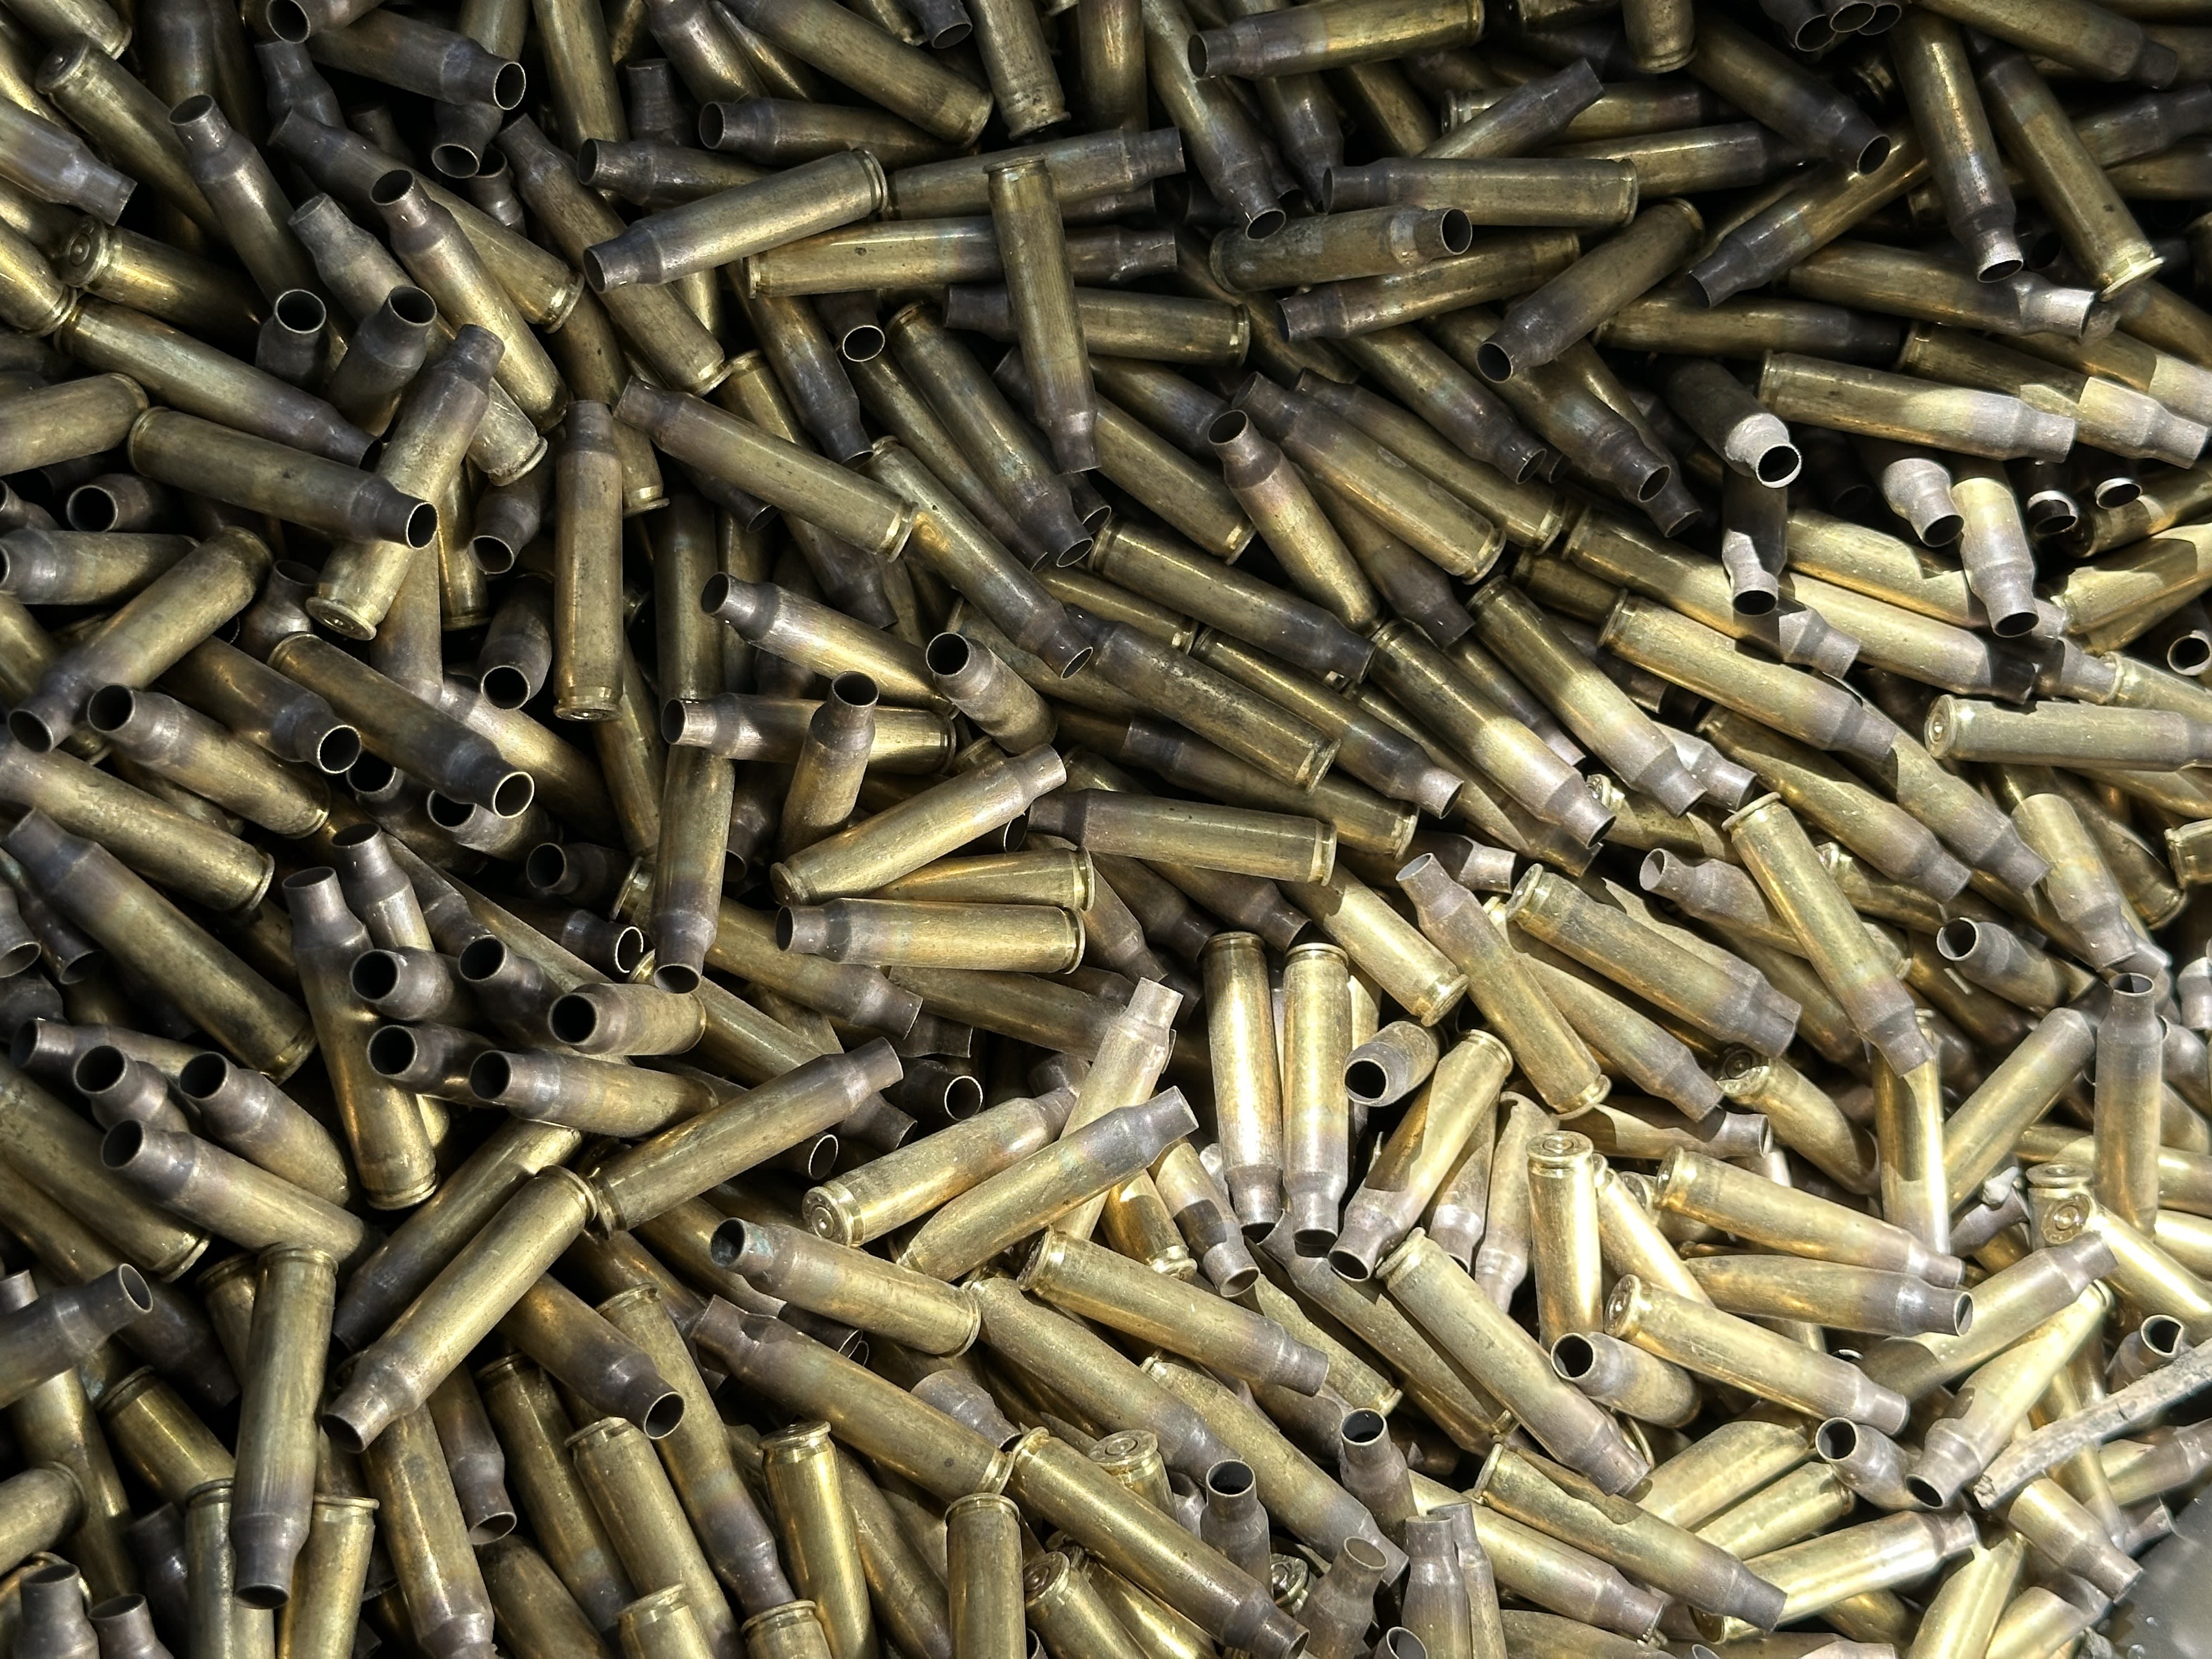 close up of expelled ammo cartridge casings